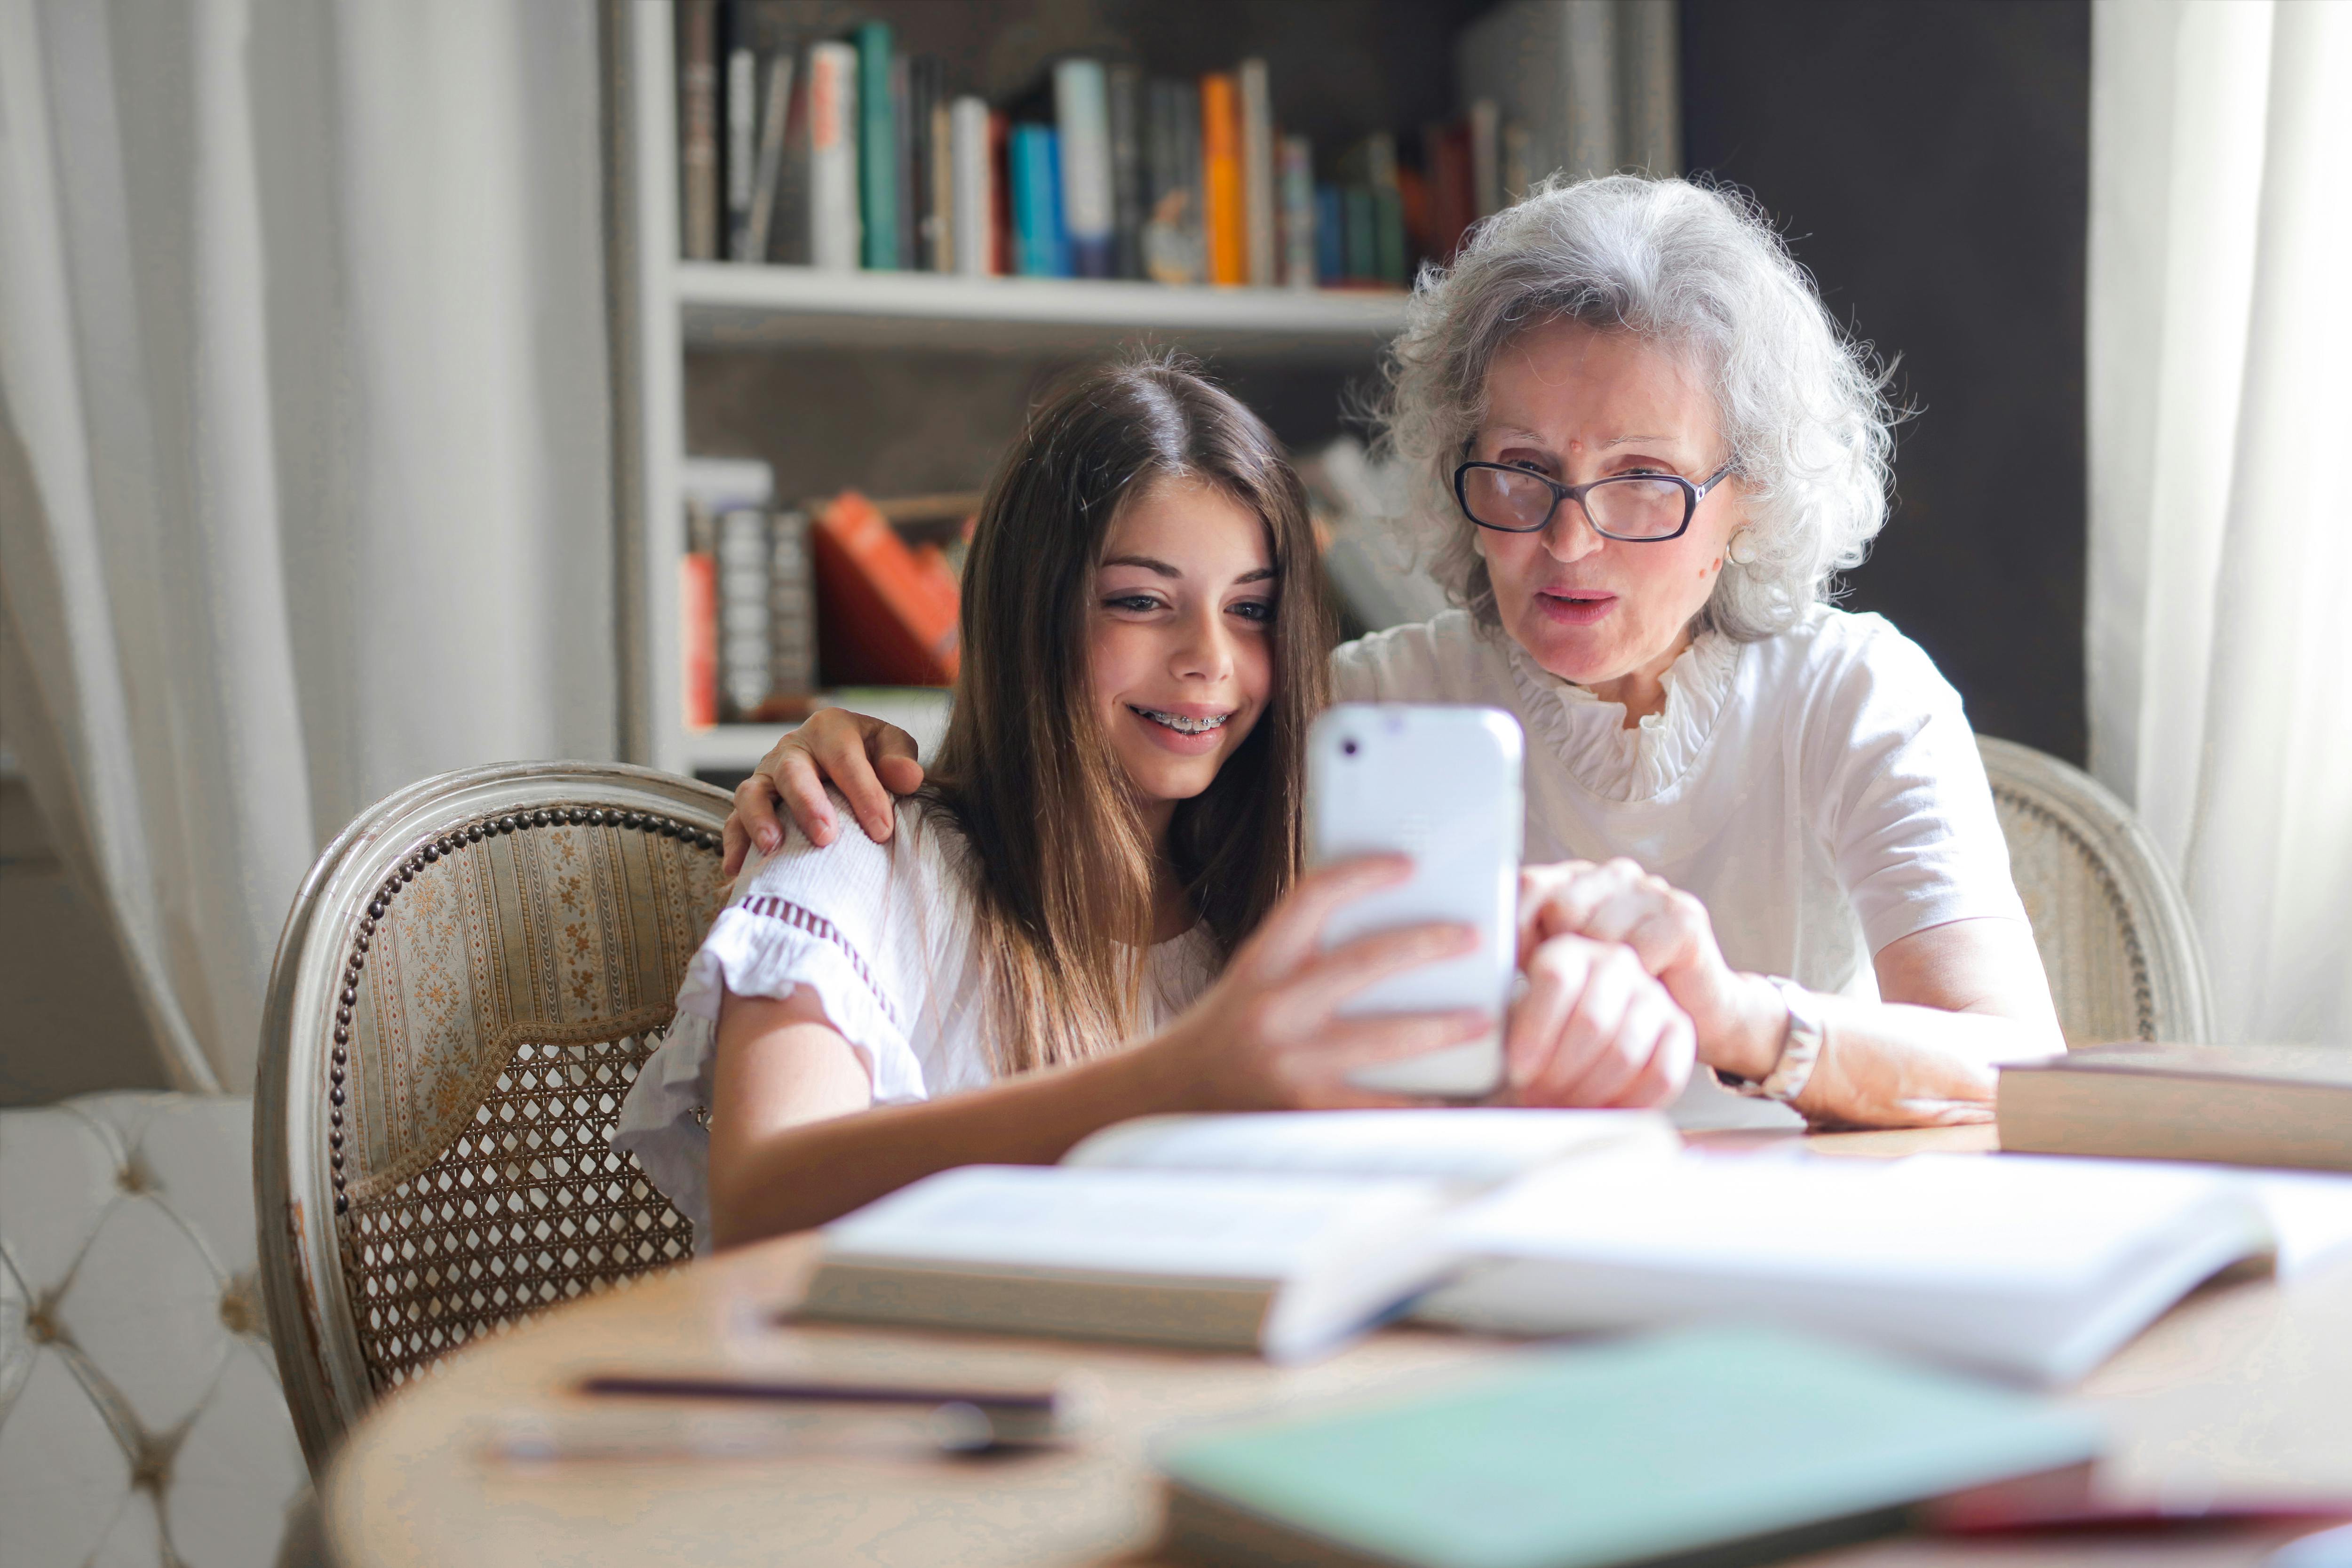 A happy little girl bonding with her grandmother while using a phone | Source: Pexels